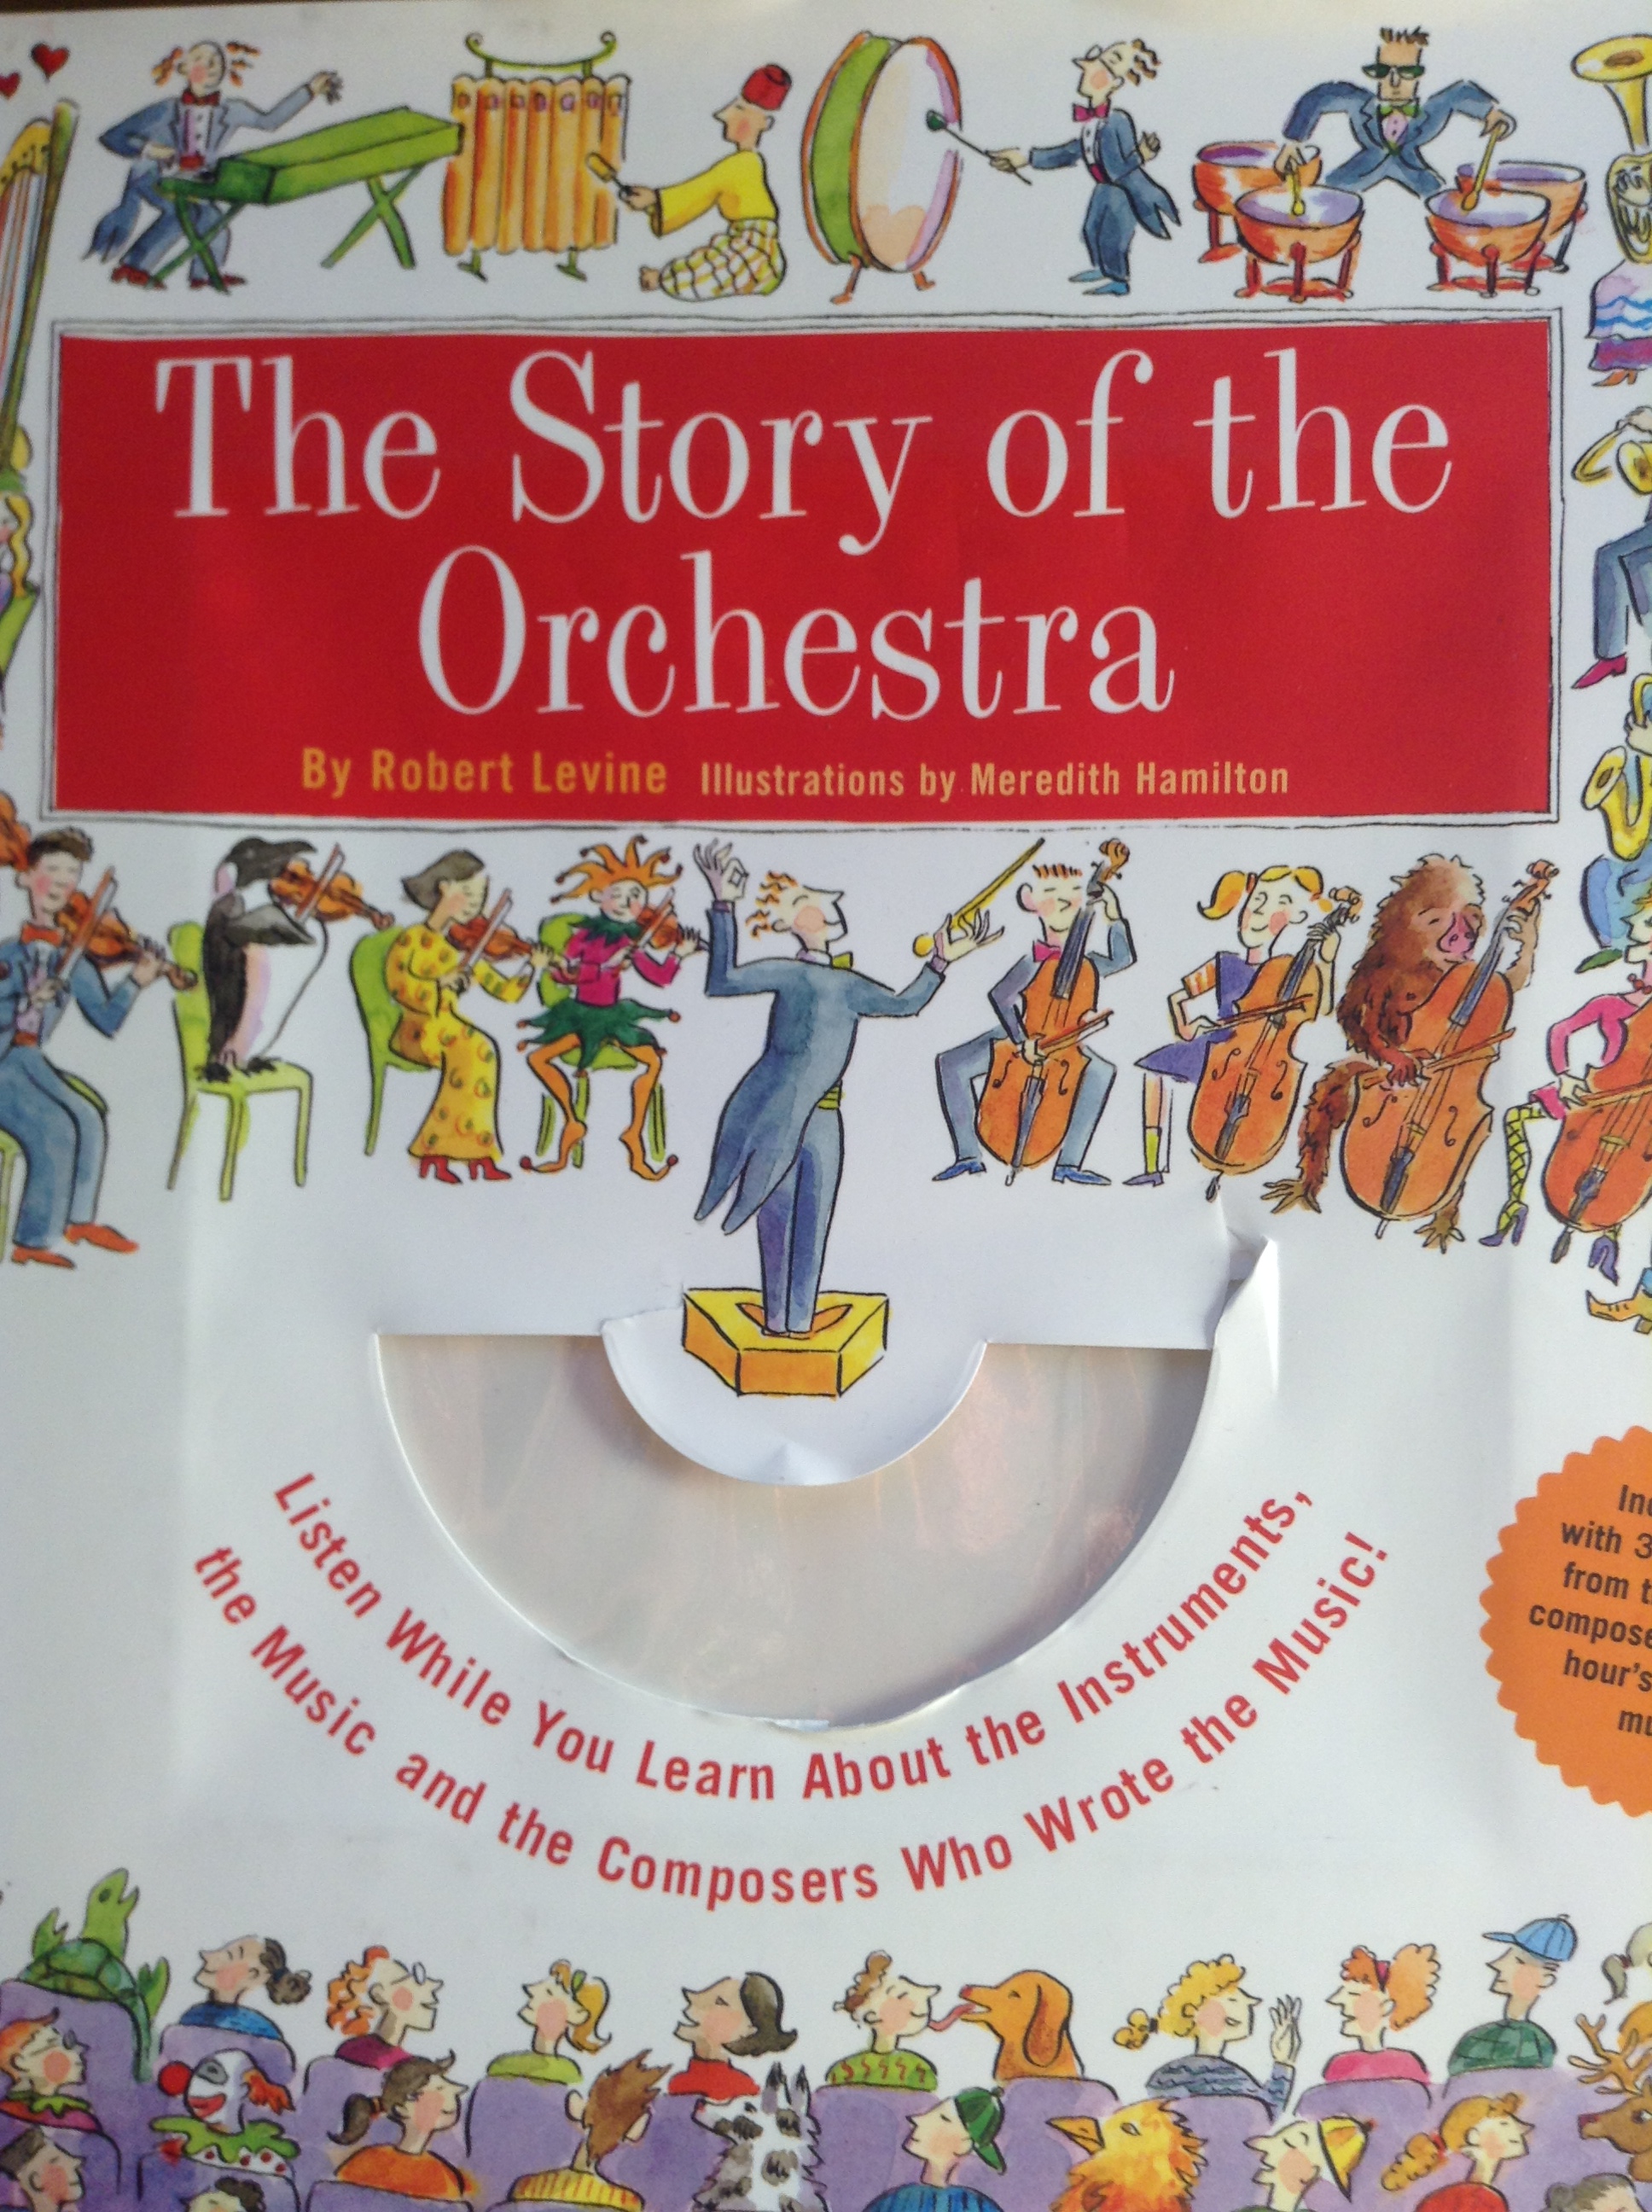 The Story of the Orchestra: how to give your kids a musical education